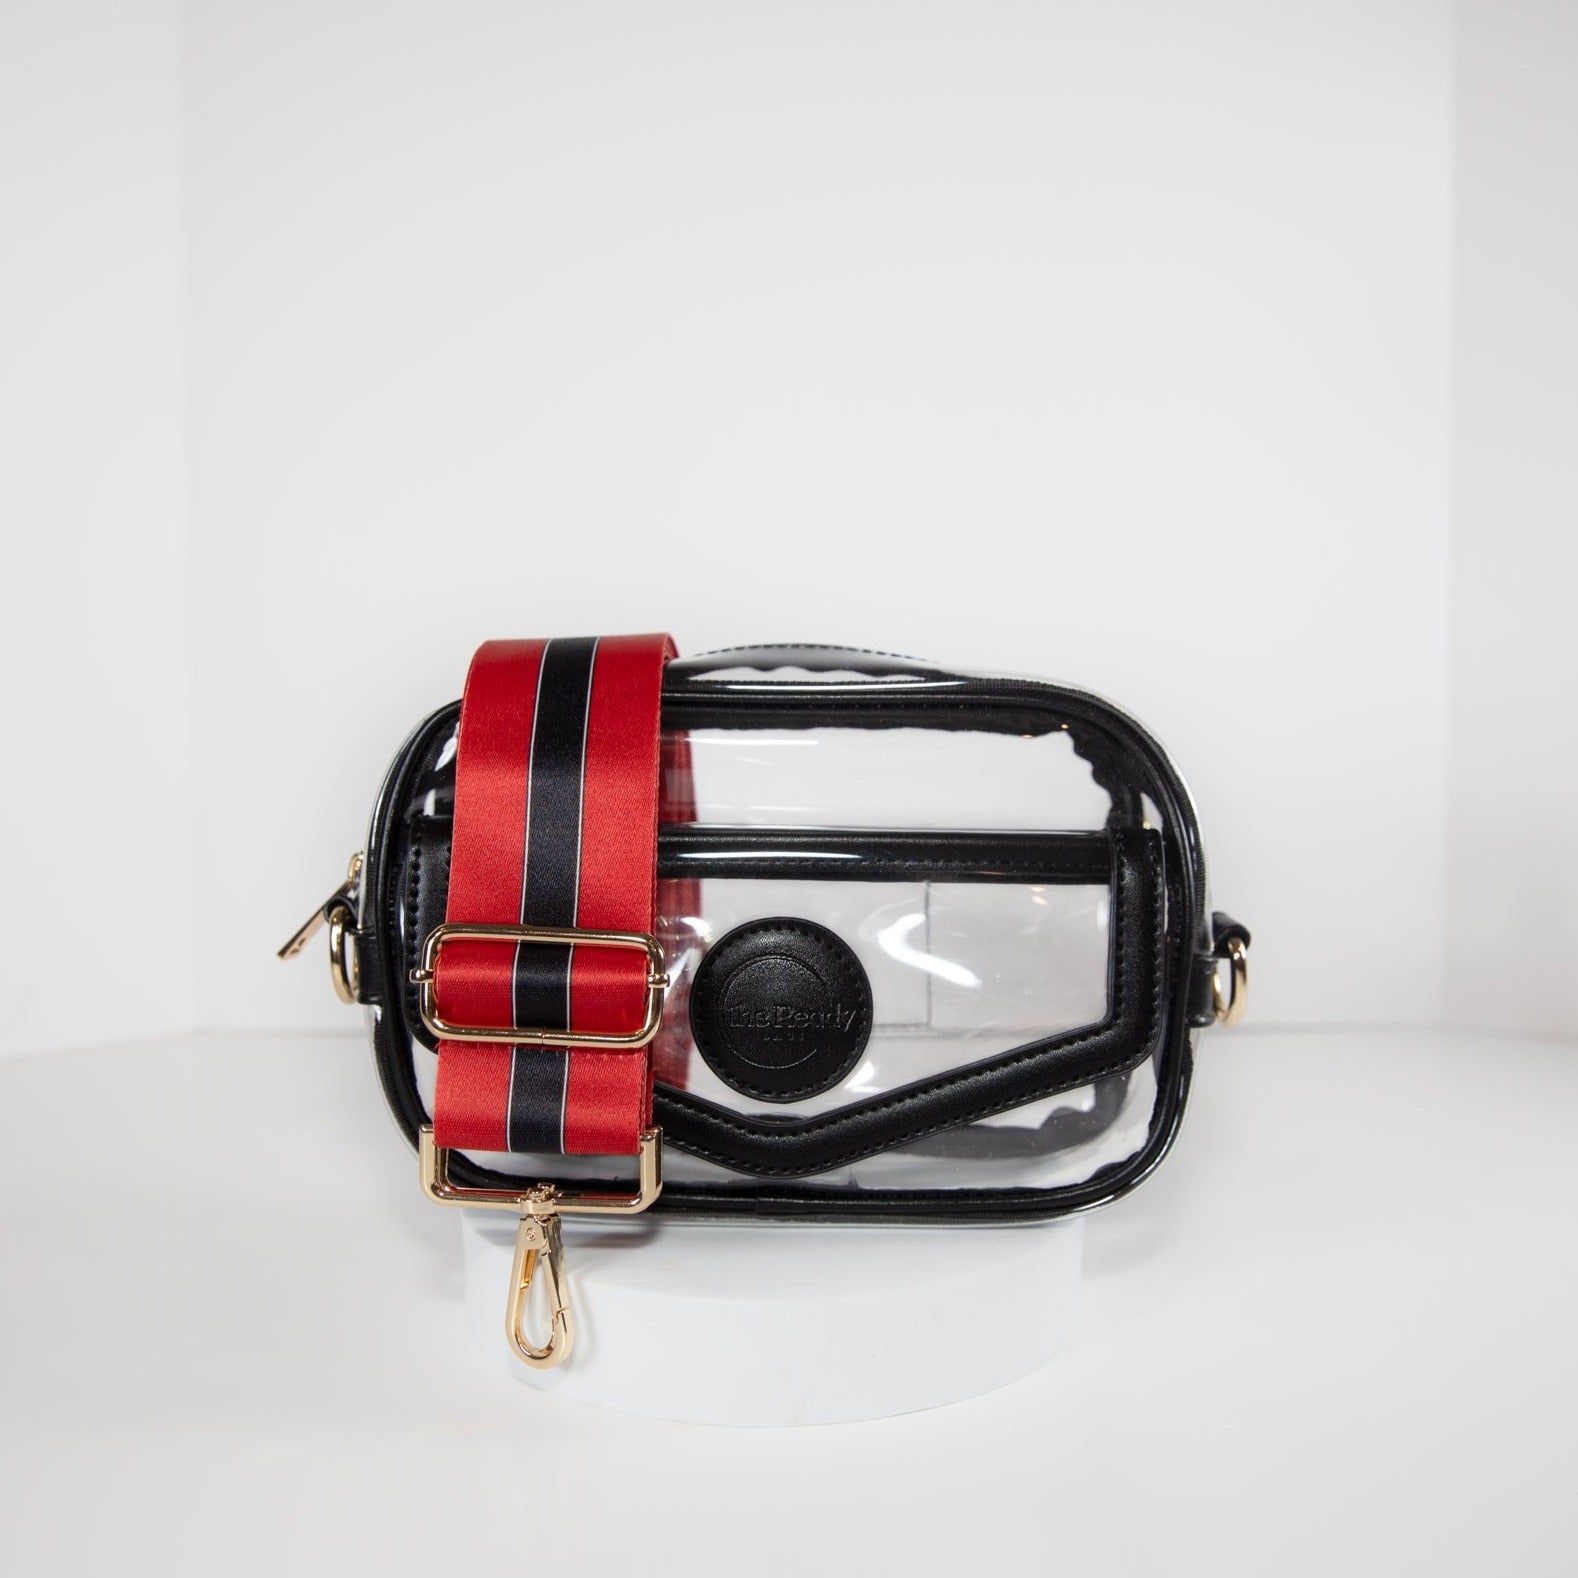 Clear stadium bag with black leather trim, front facing, with a crossbody strap in team colors of the Georgia Bulldogs.